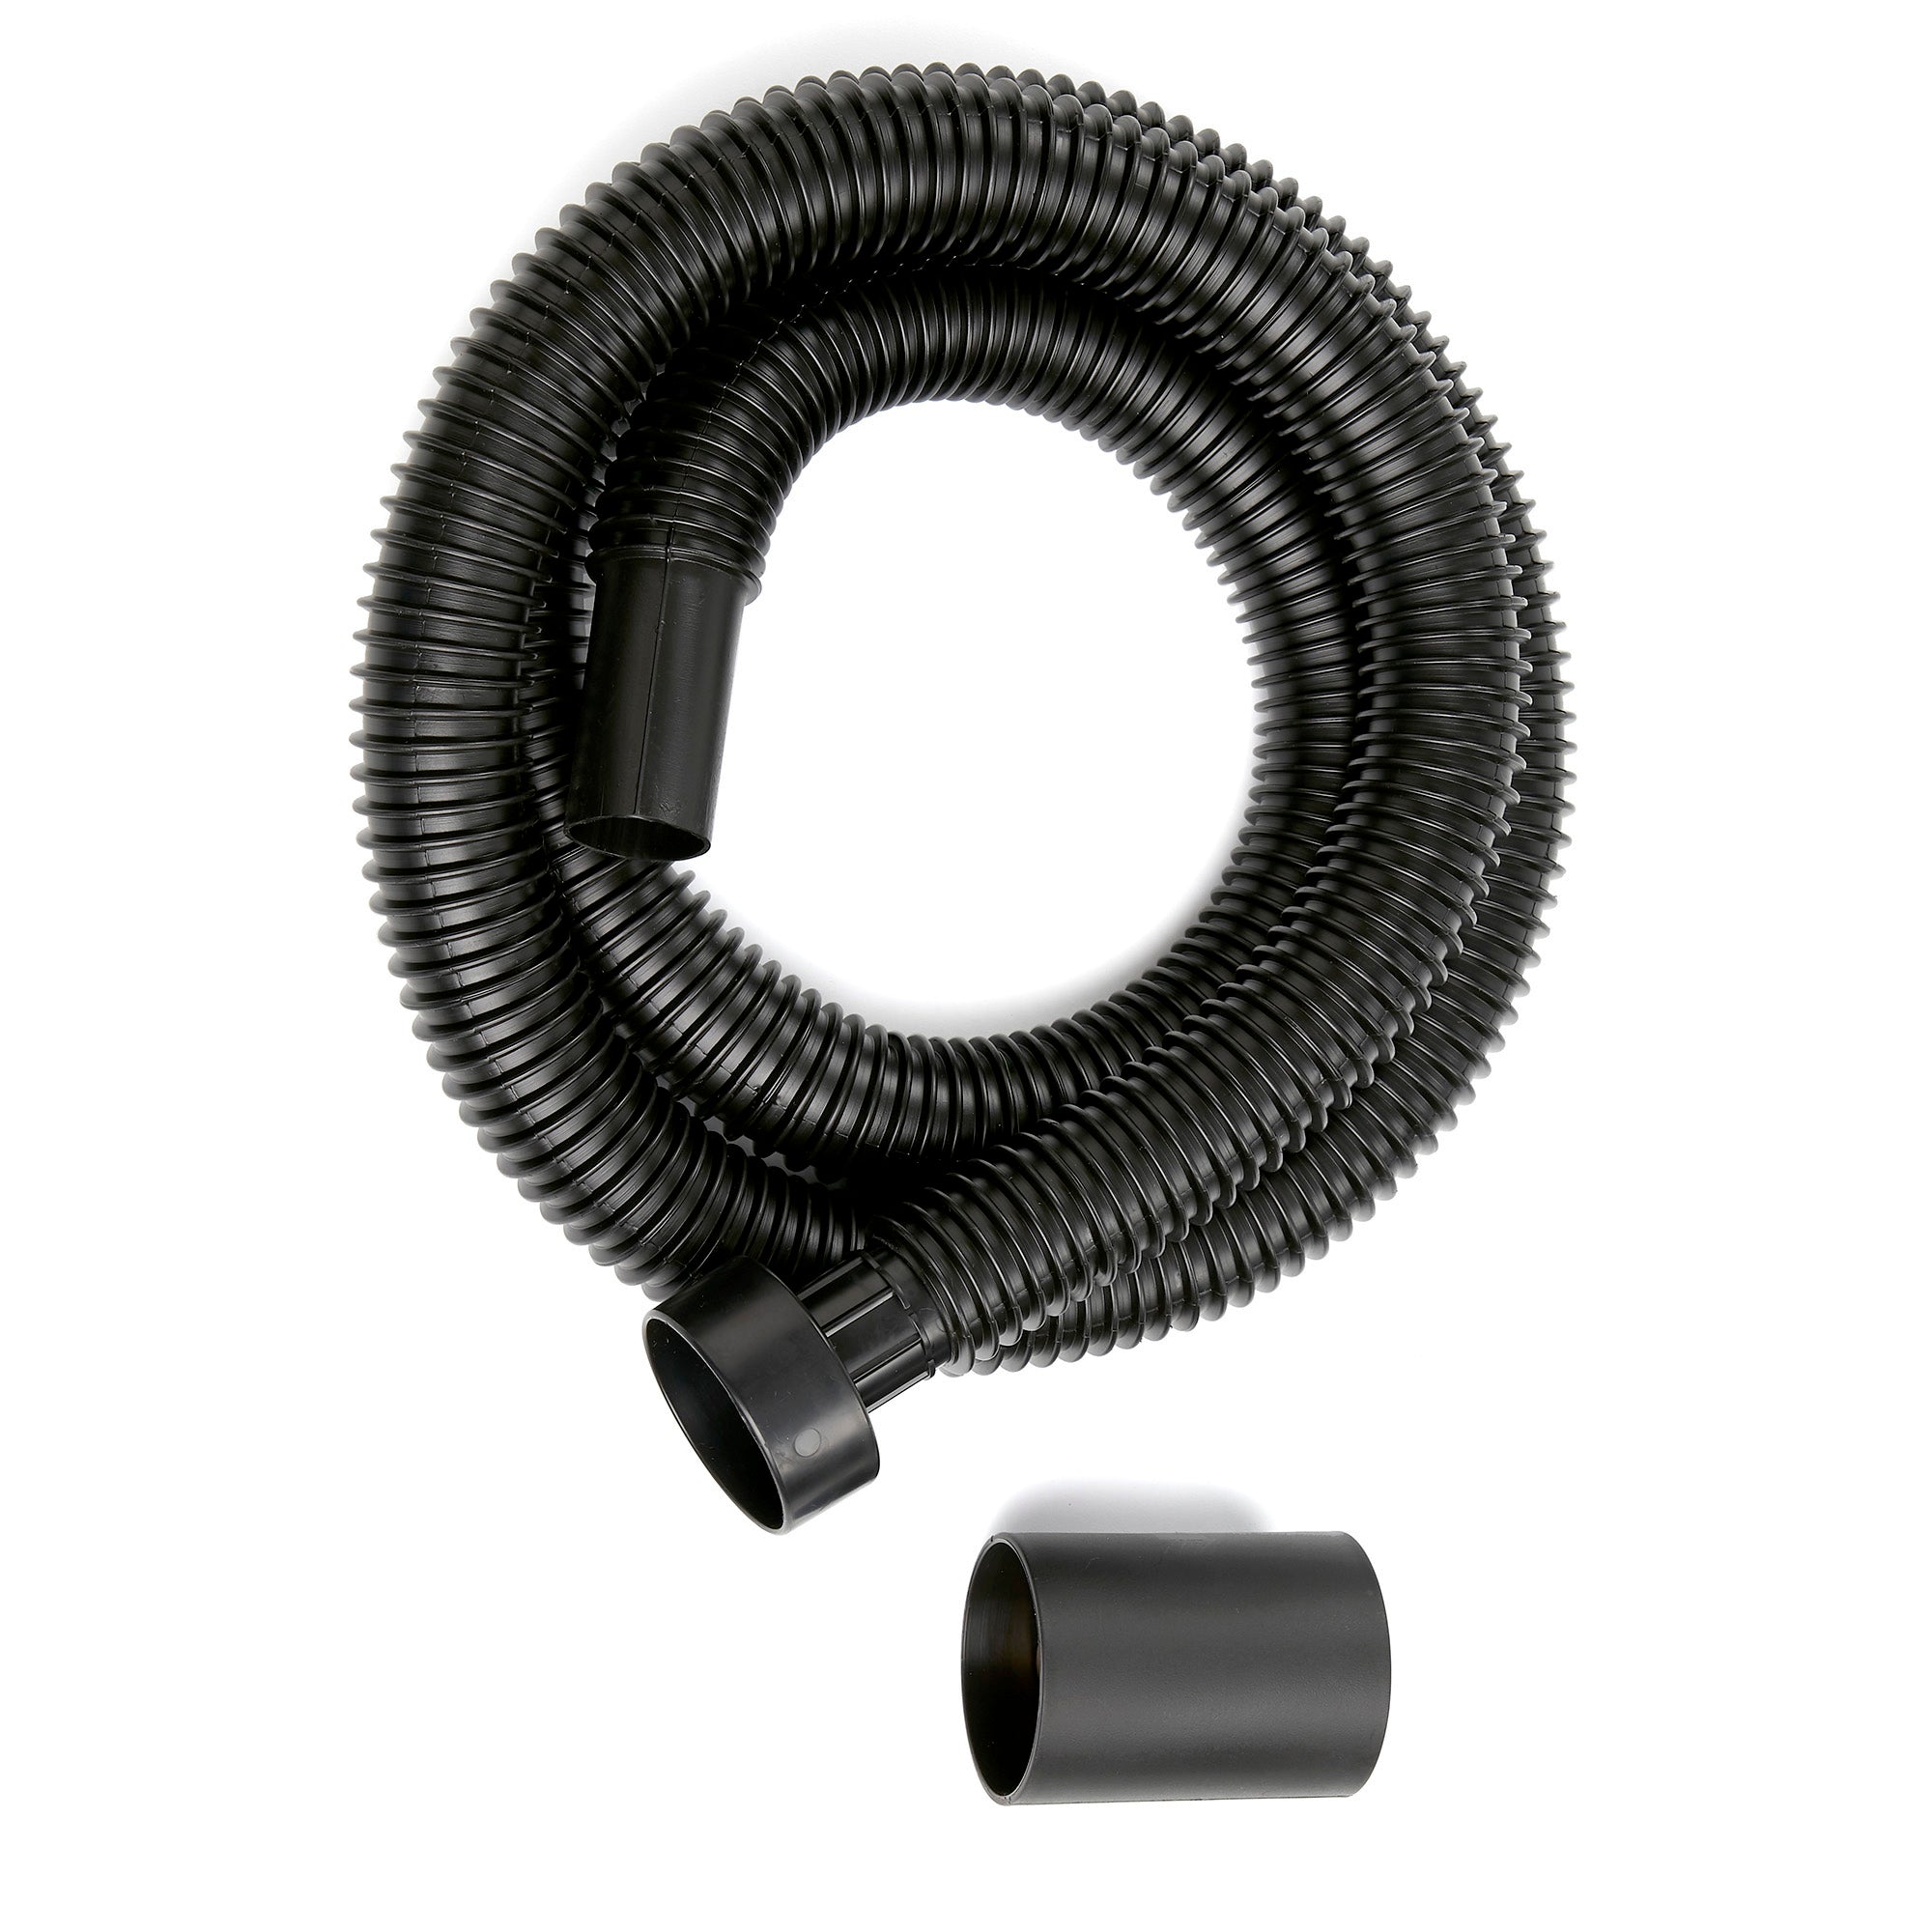 Craftsman CMXZVBE38762 1-1/4 in. x 6 ft. Friction Fit Wet/Dry Vacuum Hose